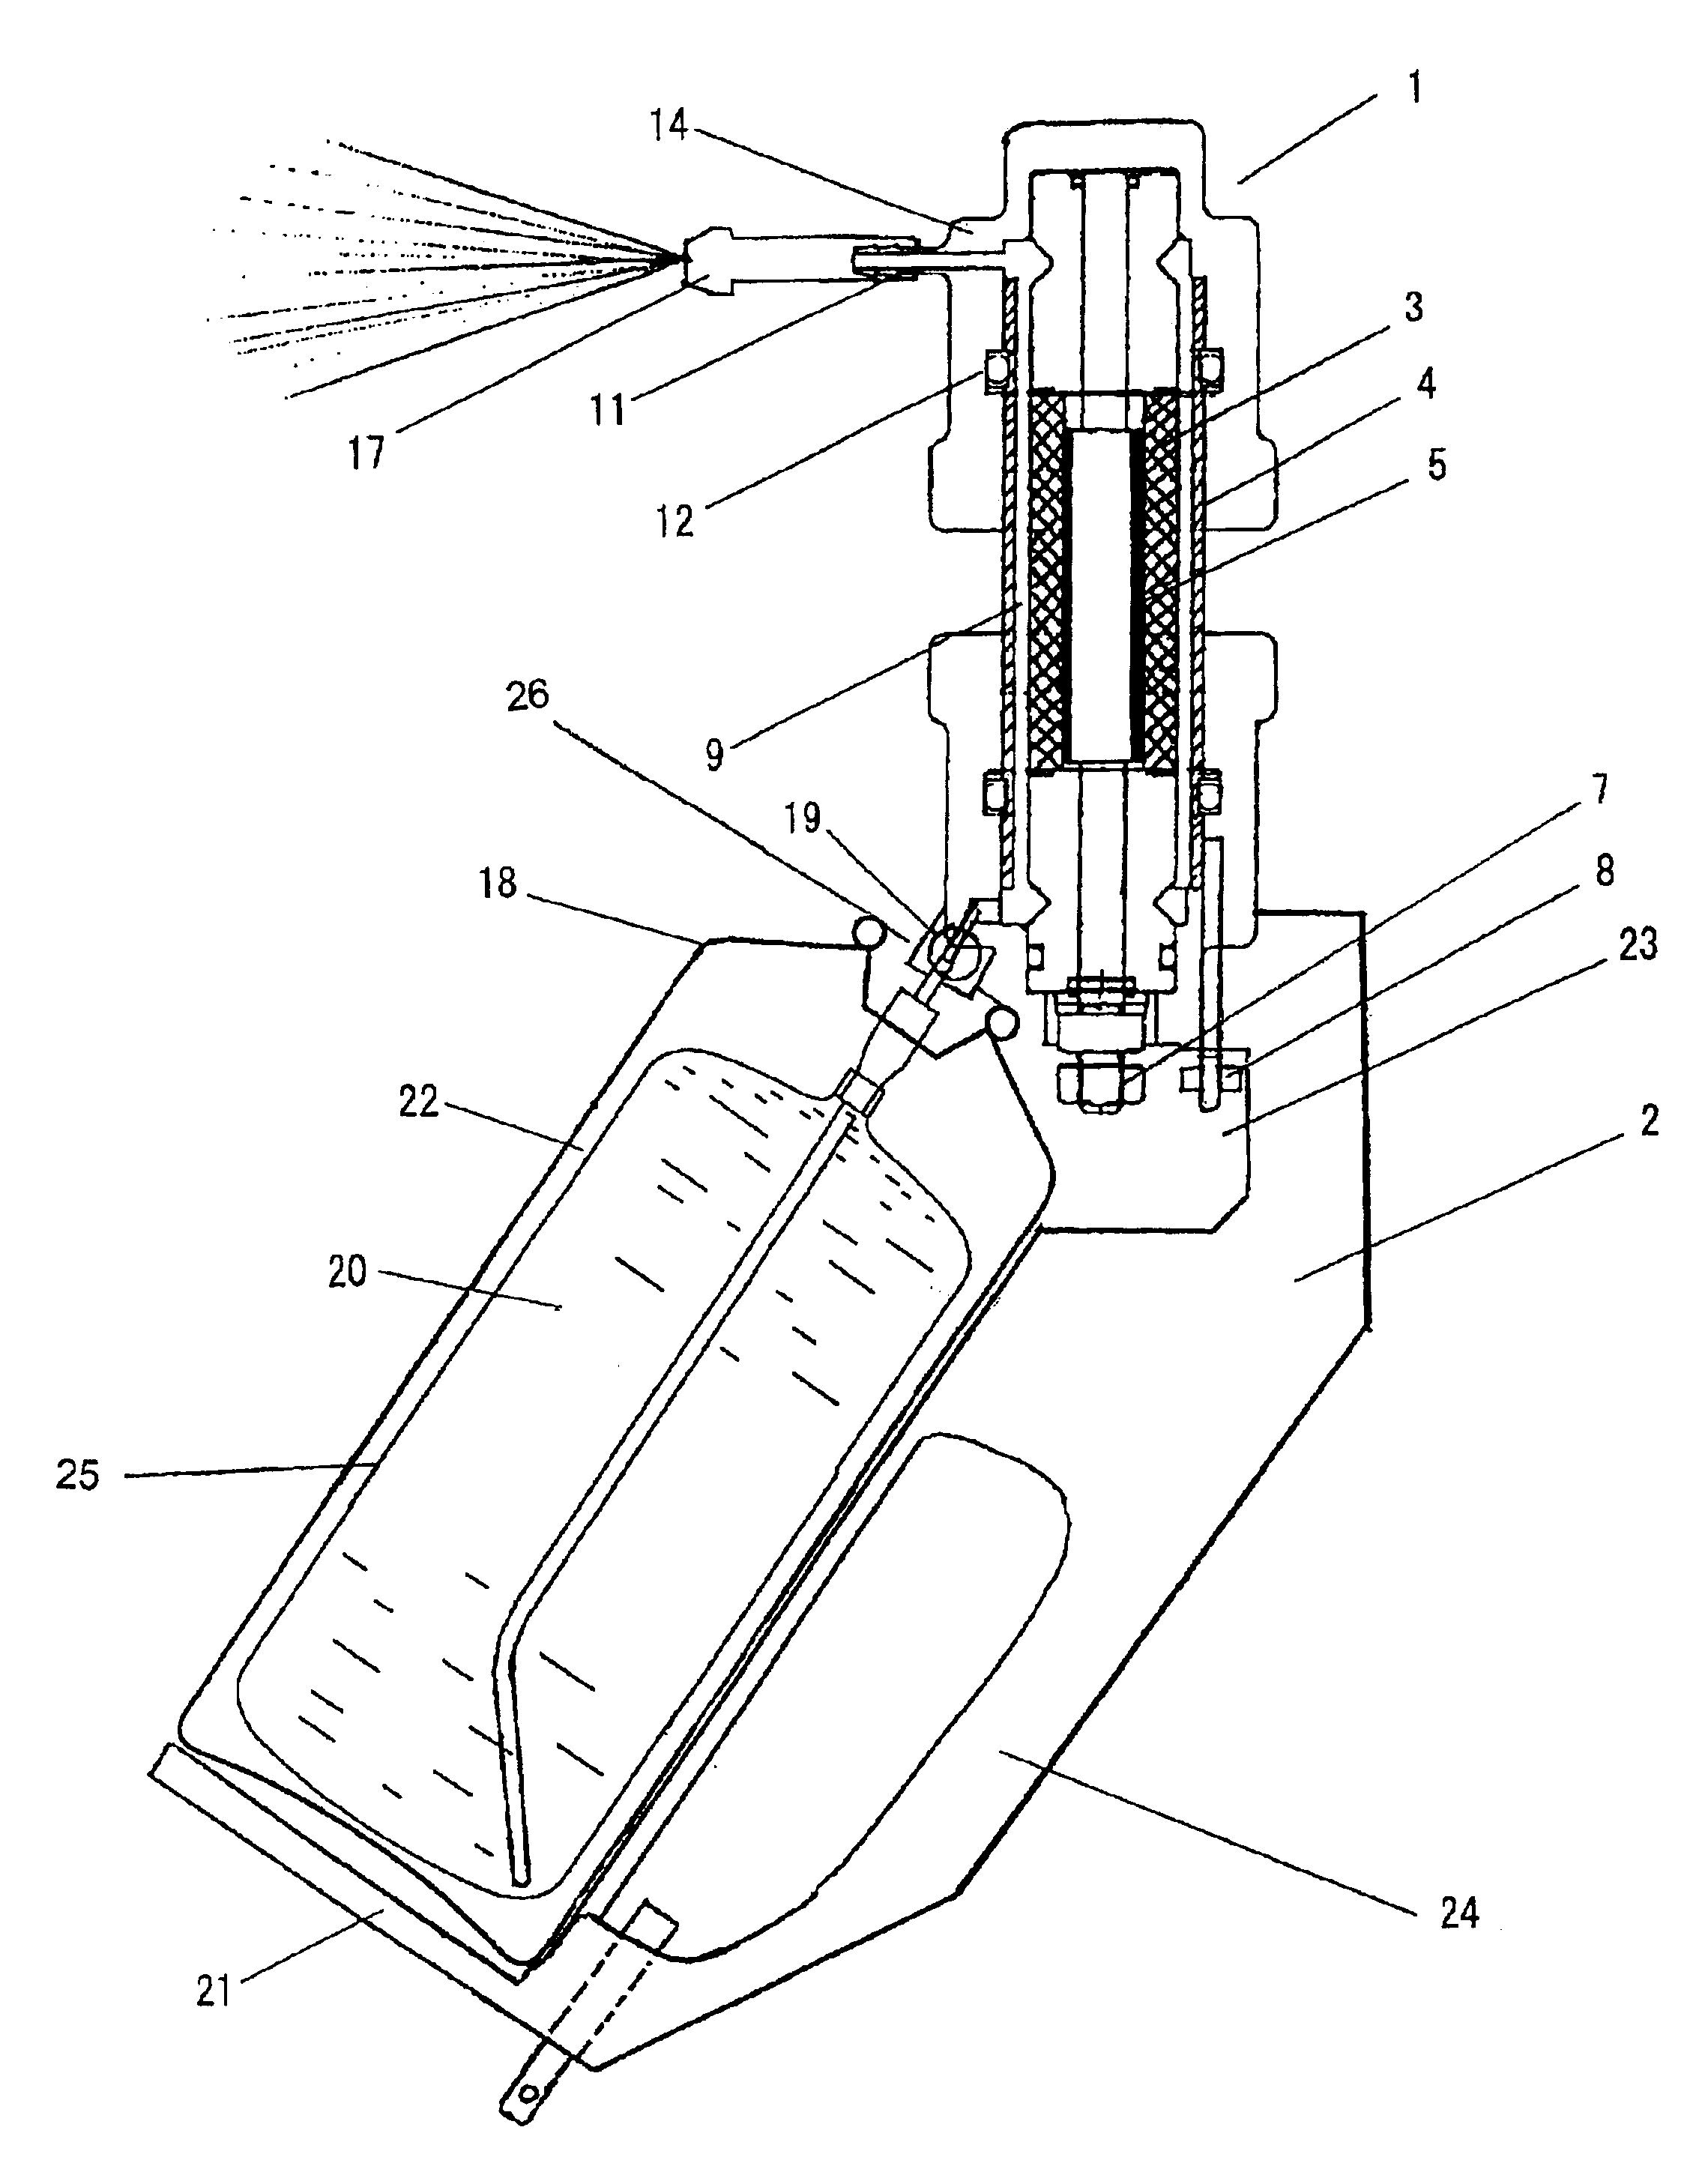 Method for generating sterilizing wash water and a portable apparatus thereof